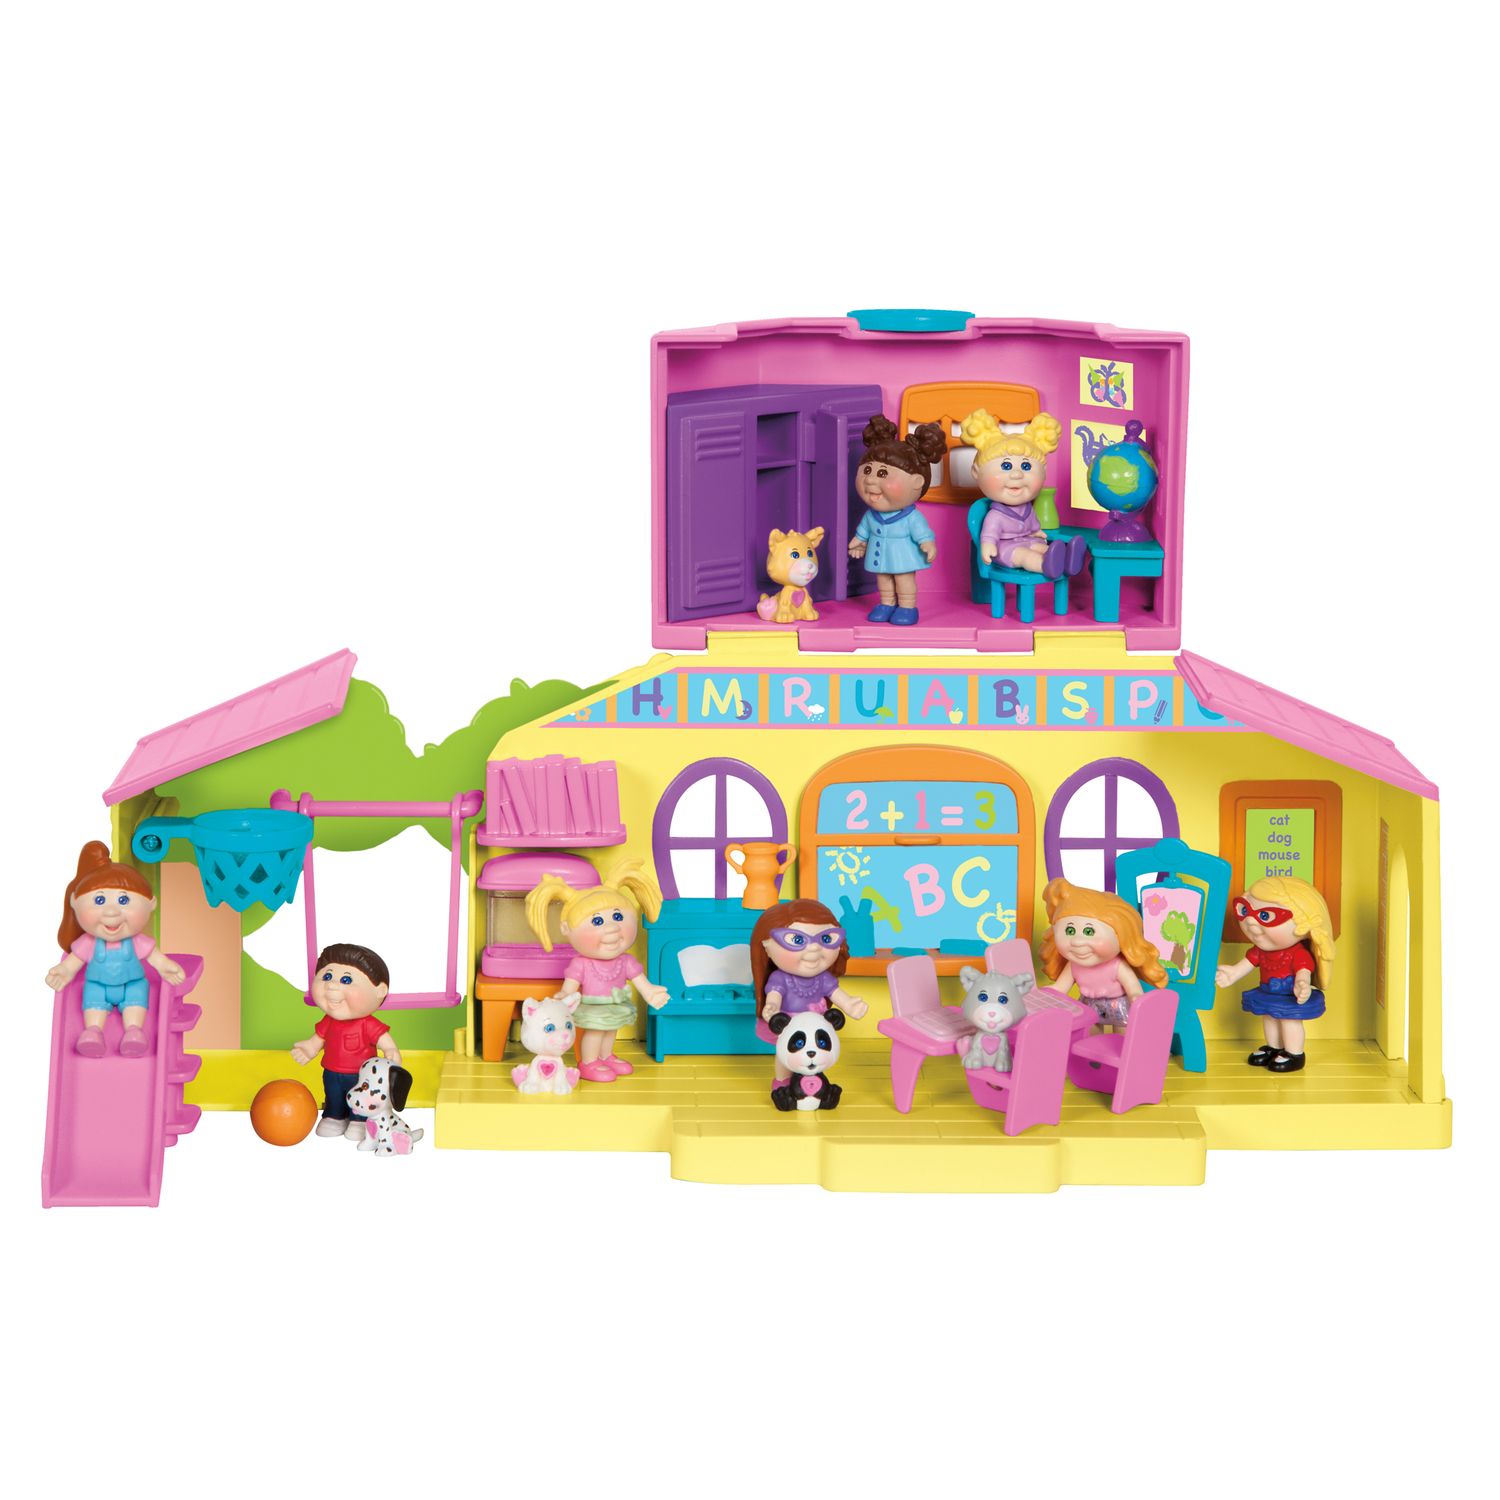 cabbage patch doll house